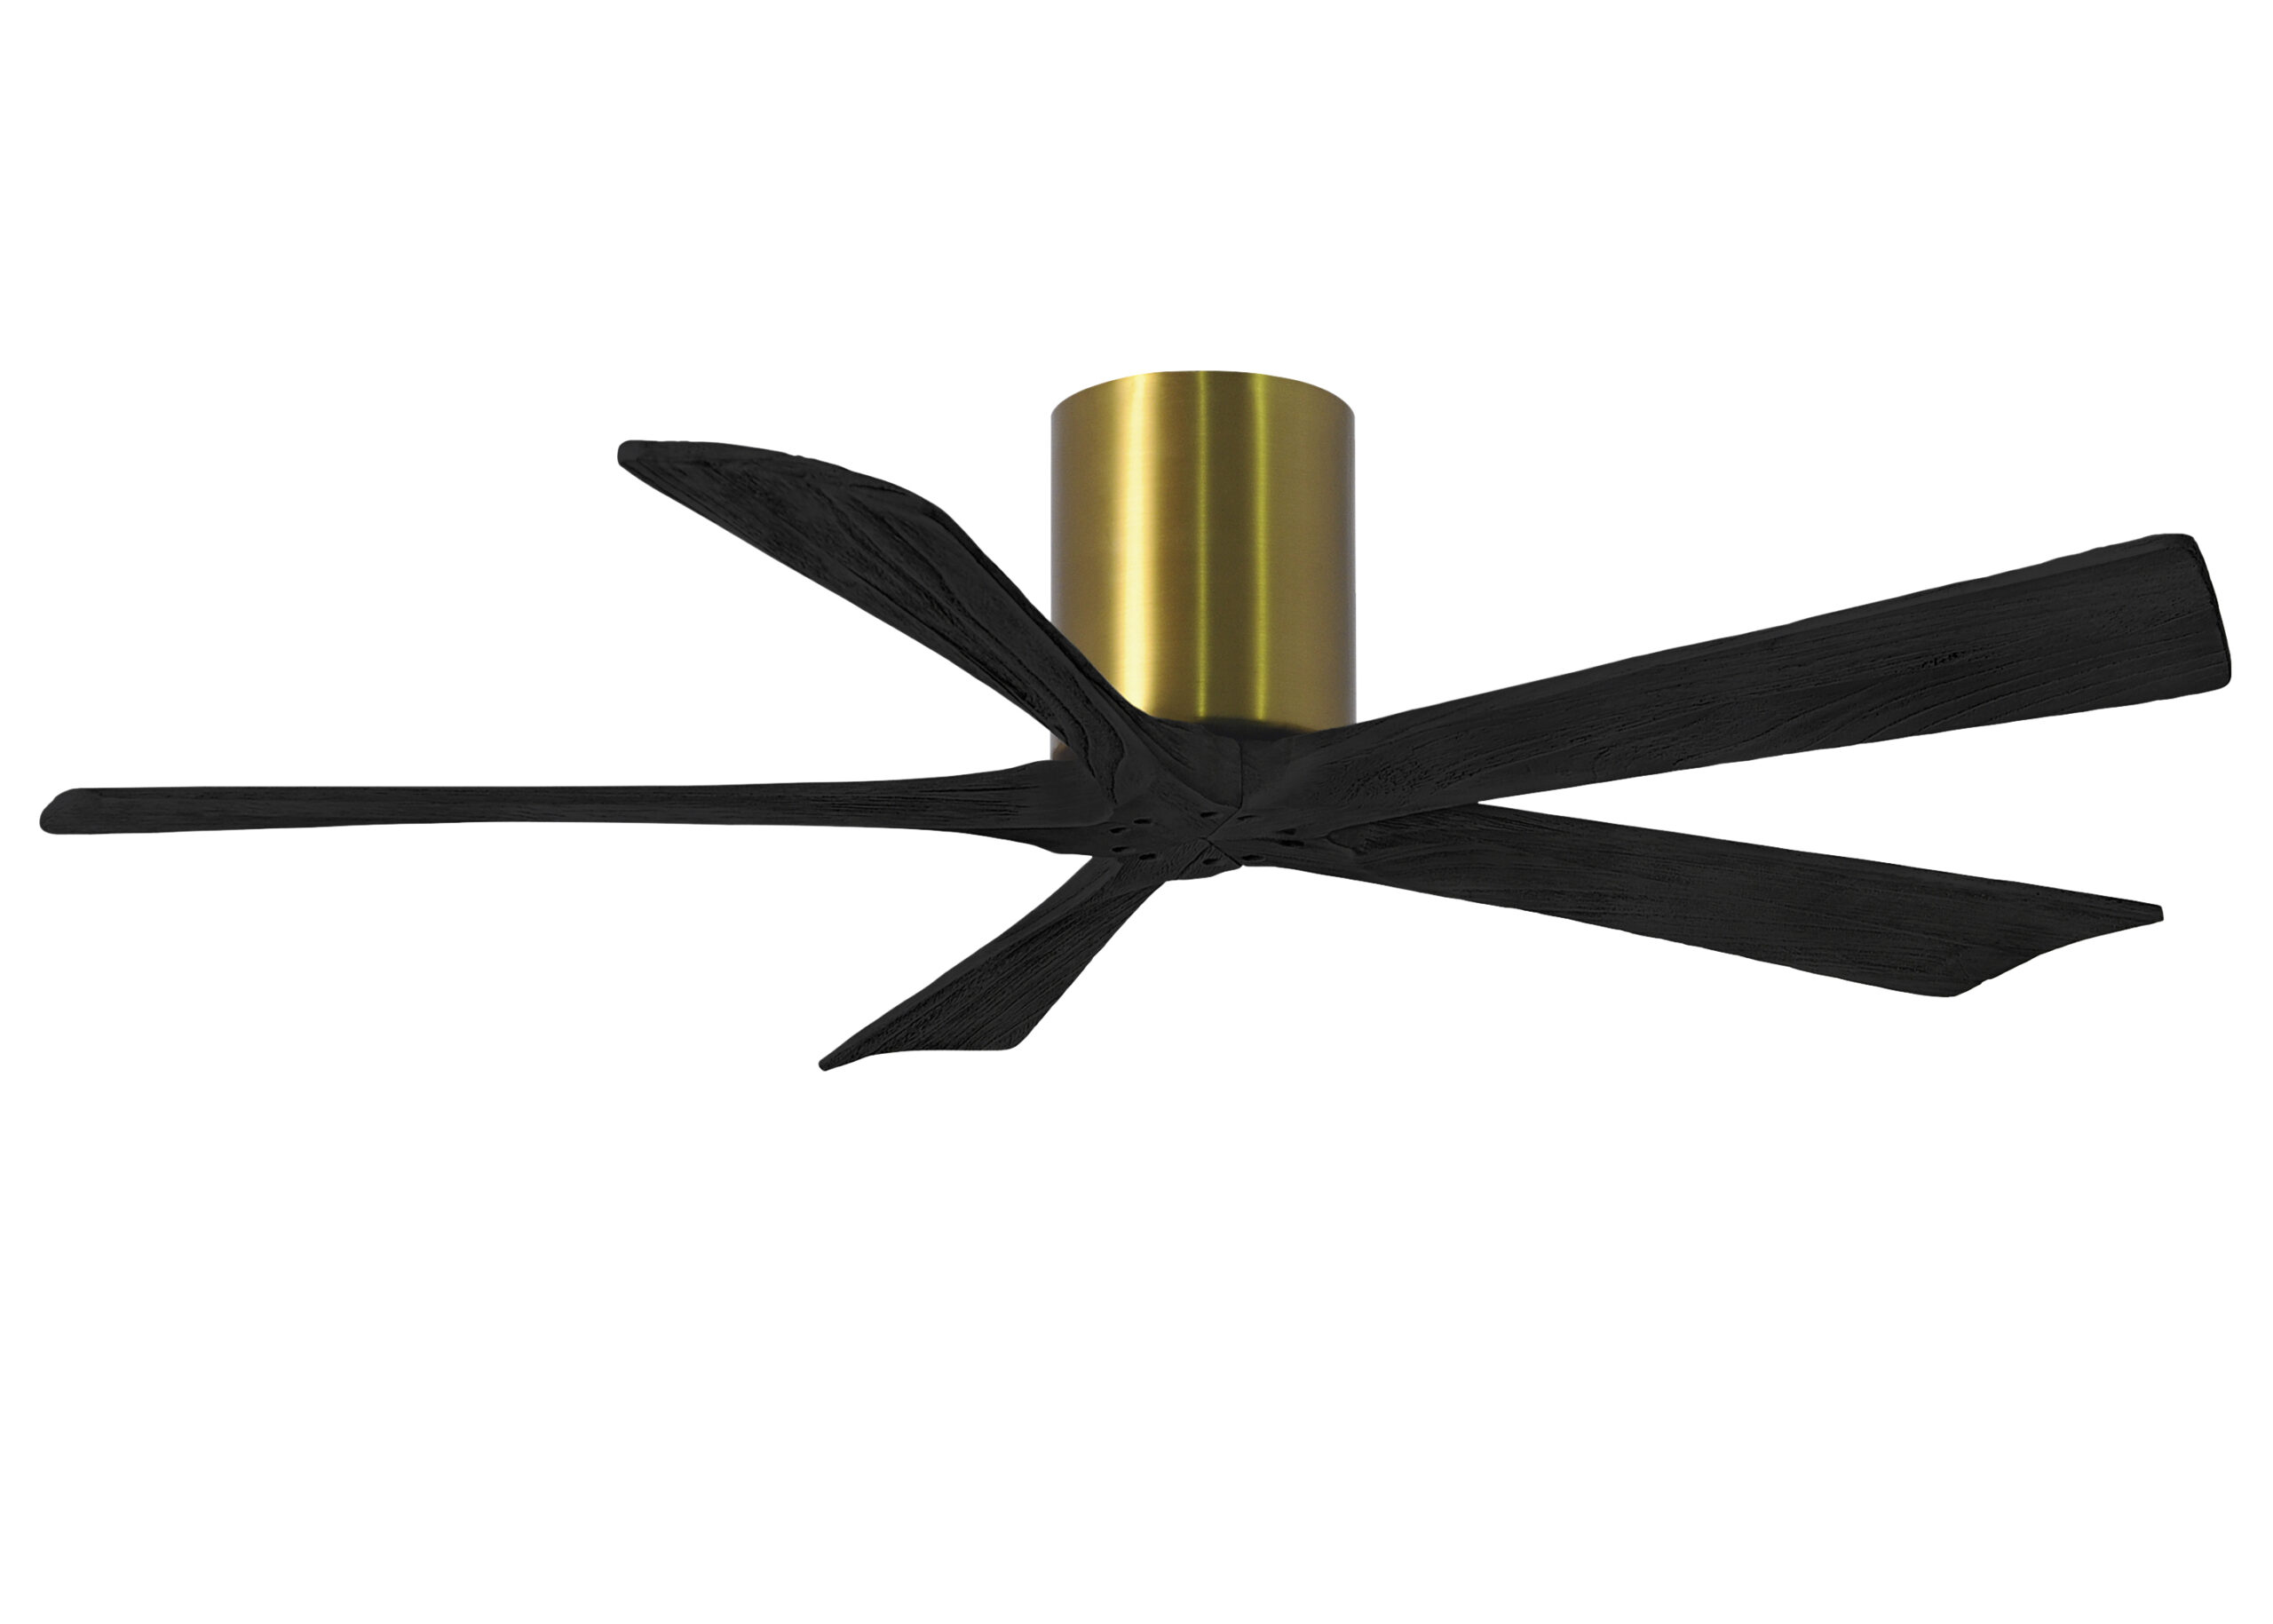 Irene-5H Ceiling Fan in Brushed Brass Finish with 52